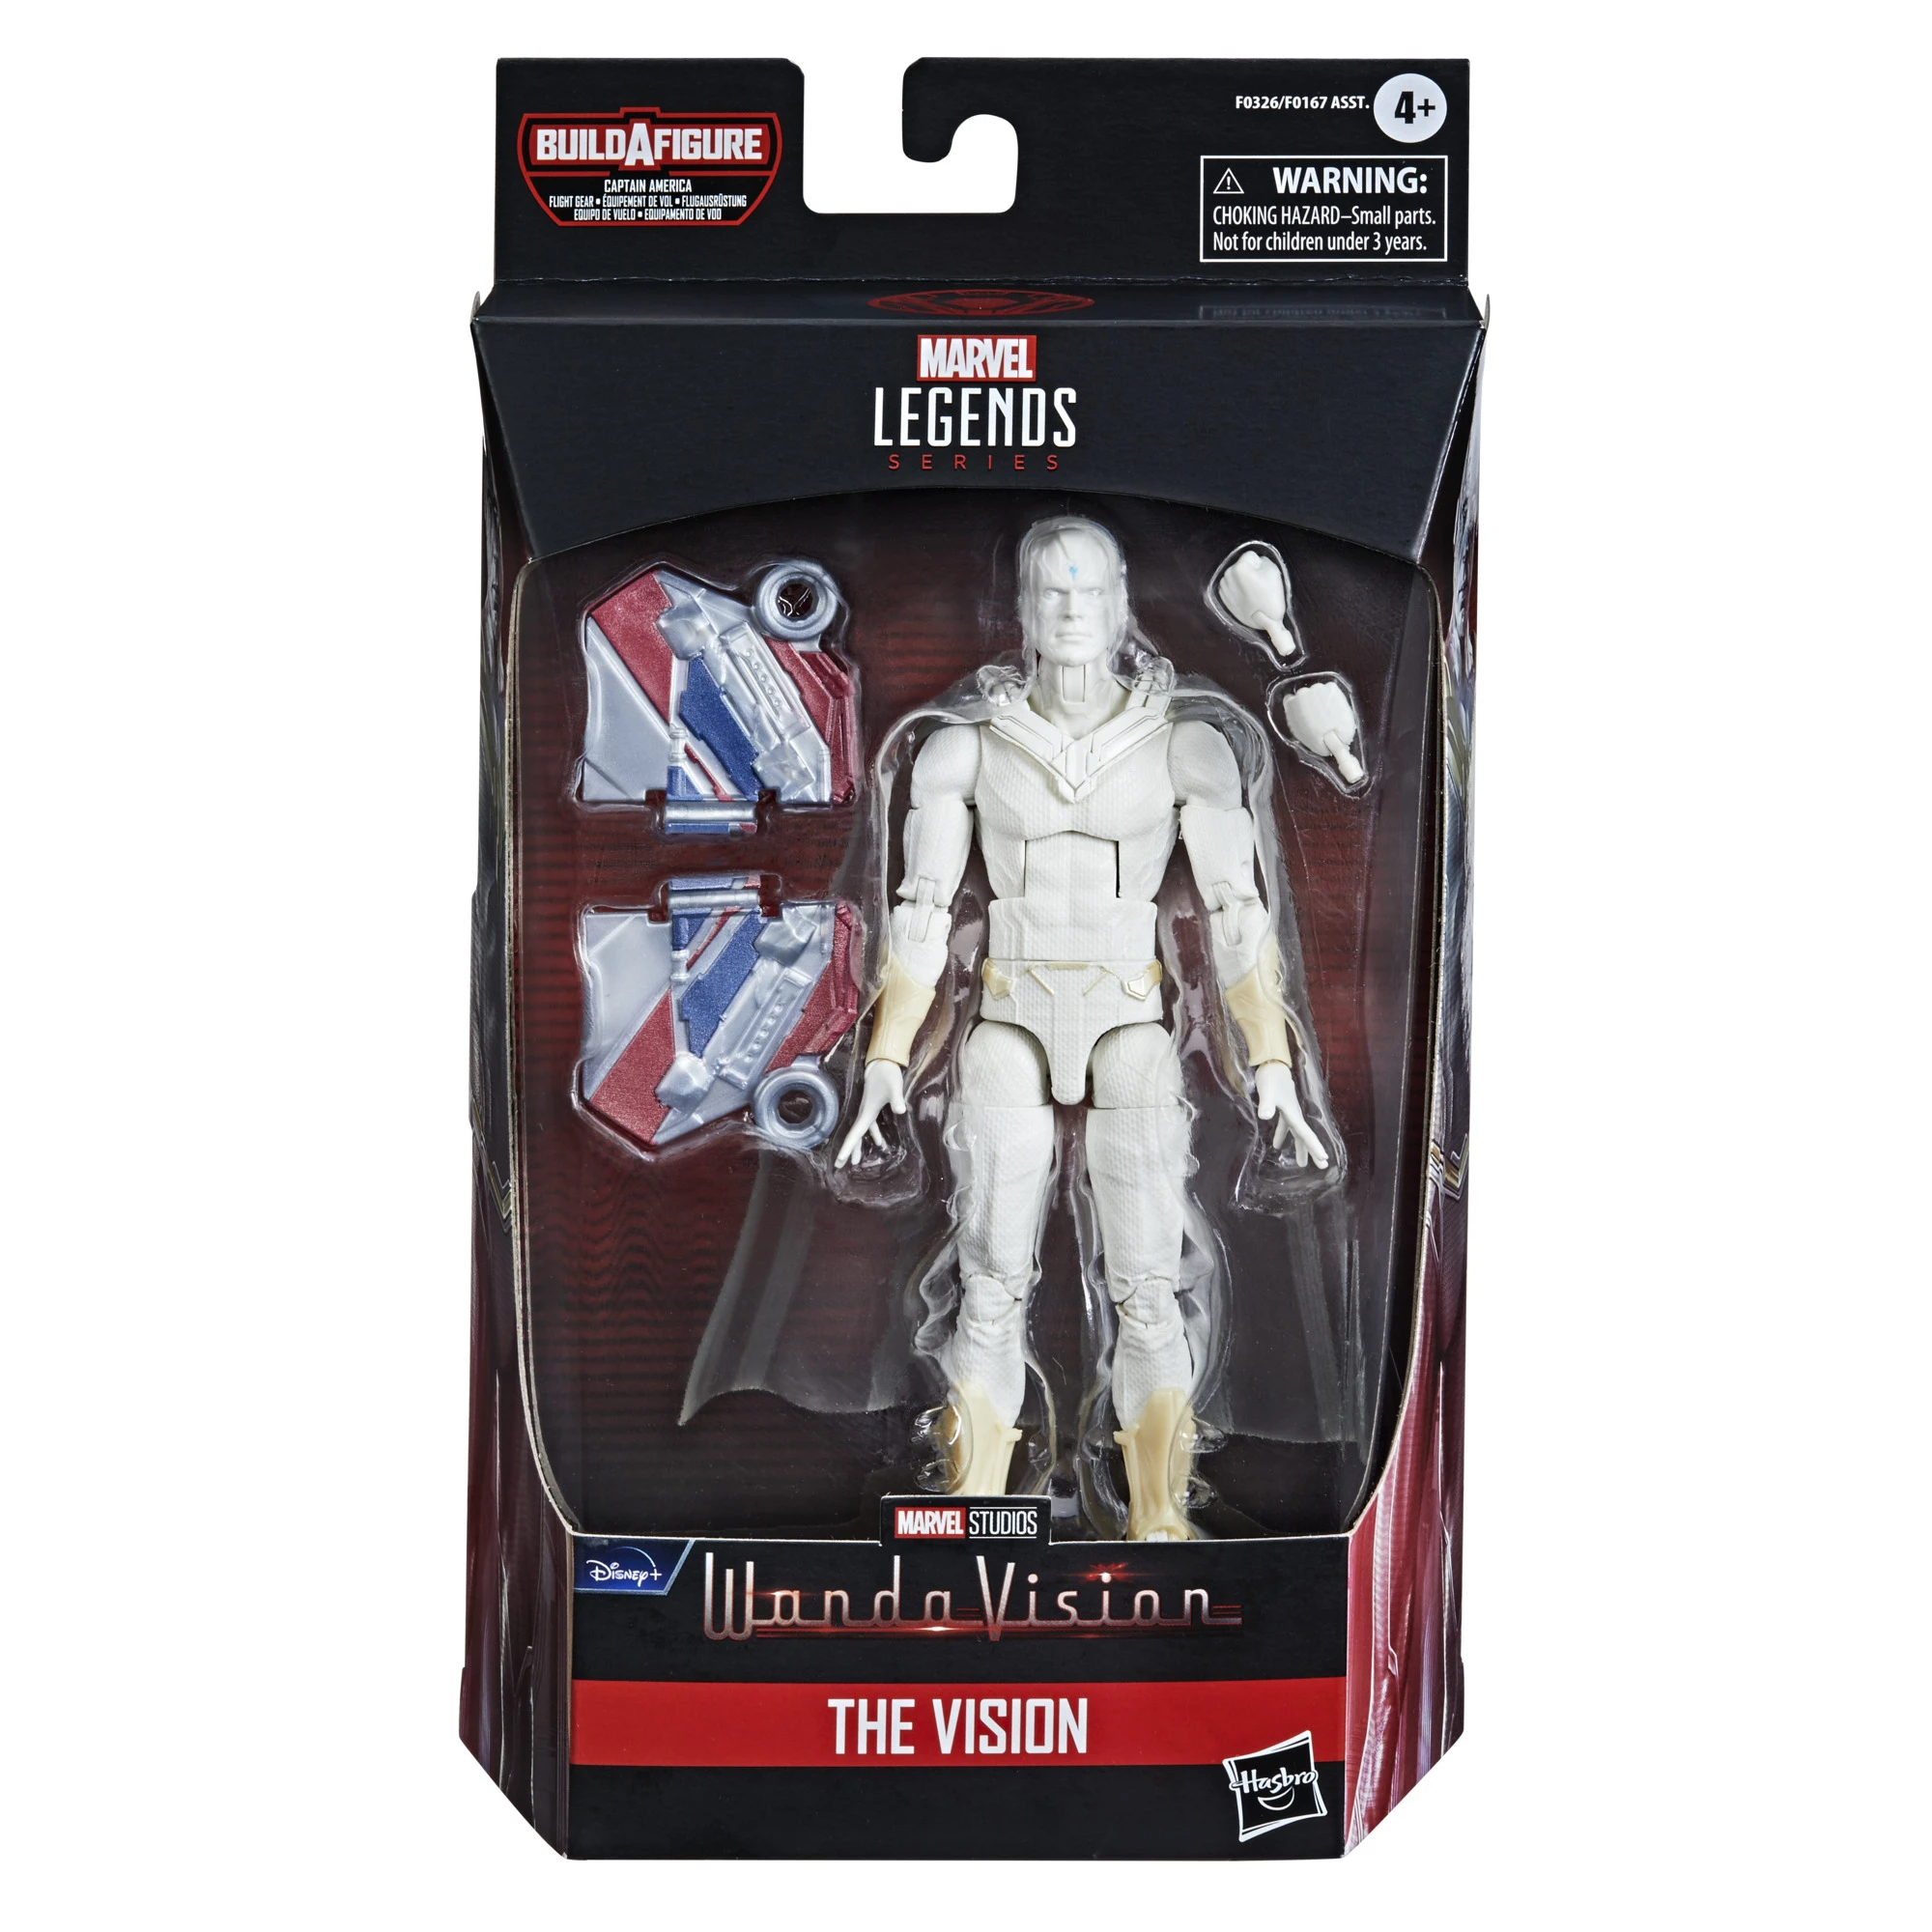 White Vision packaged